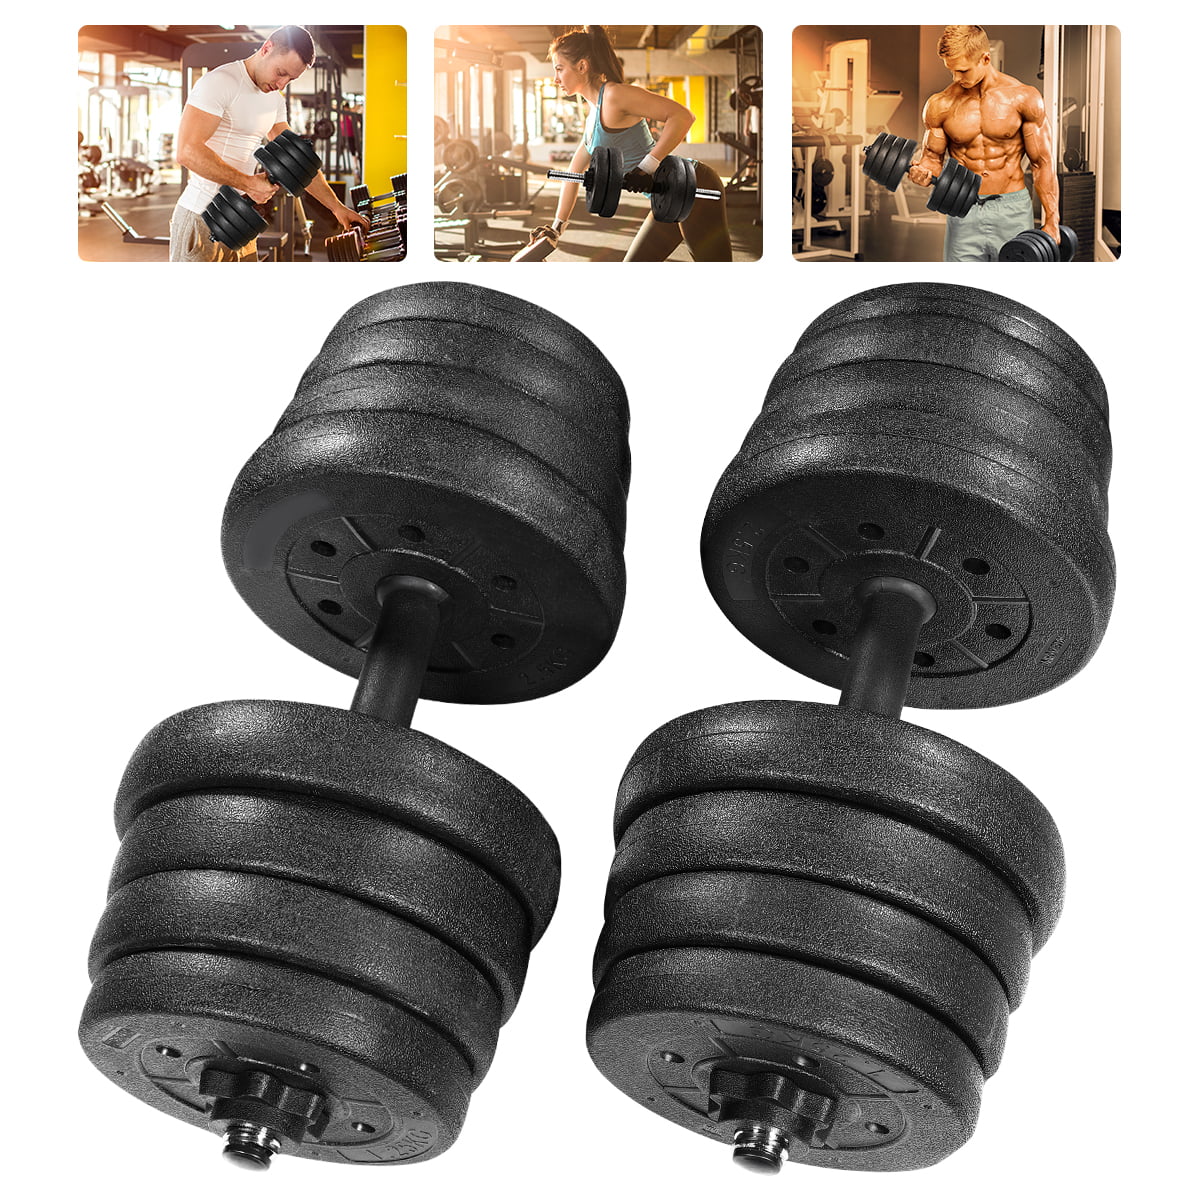 30KG Dumbells Pair of Gym Weights Barbell/Dumbbell Body Building Weight Set 